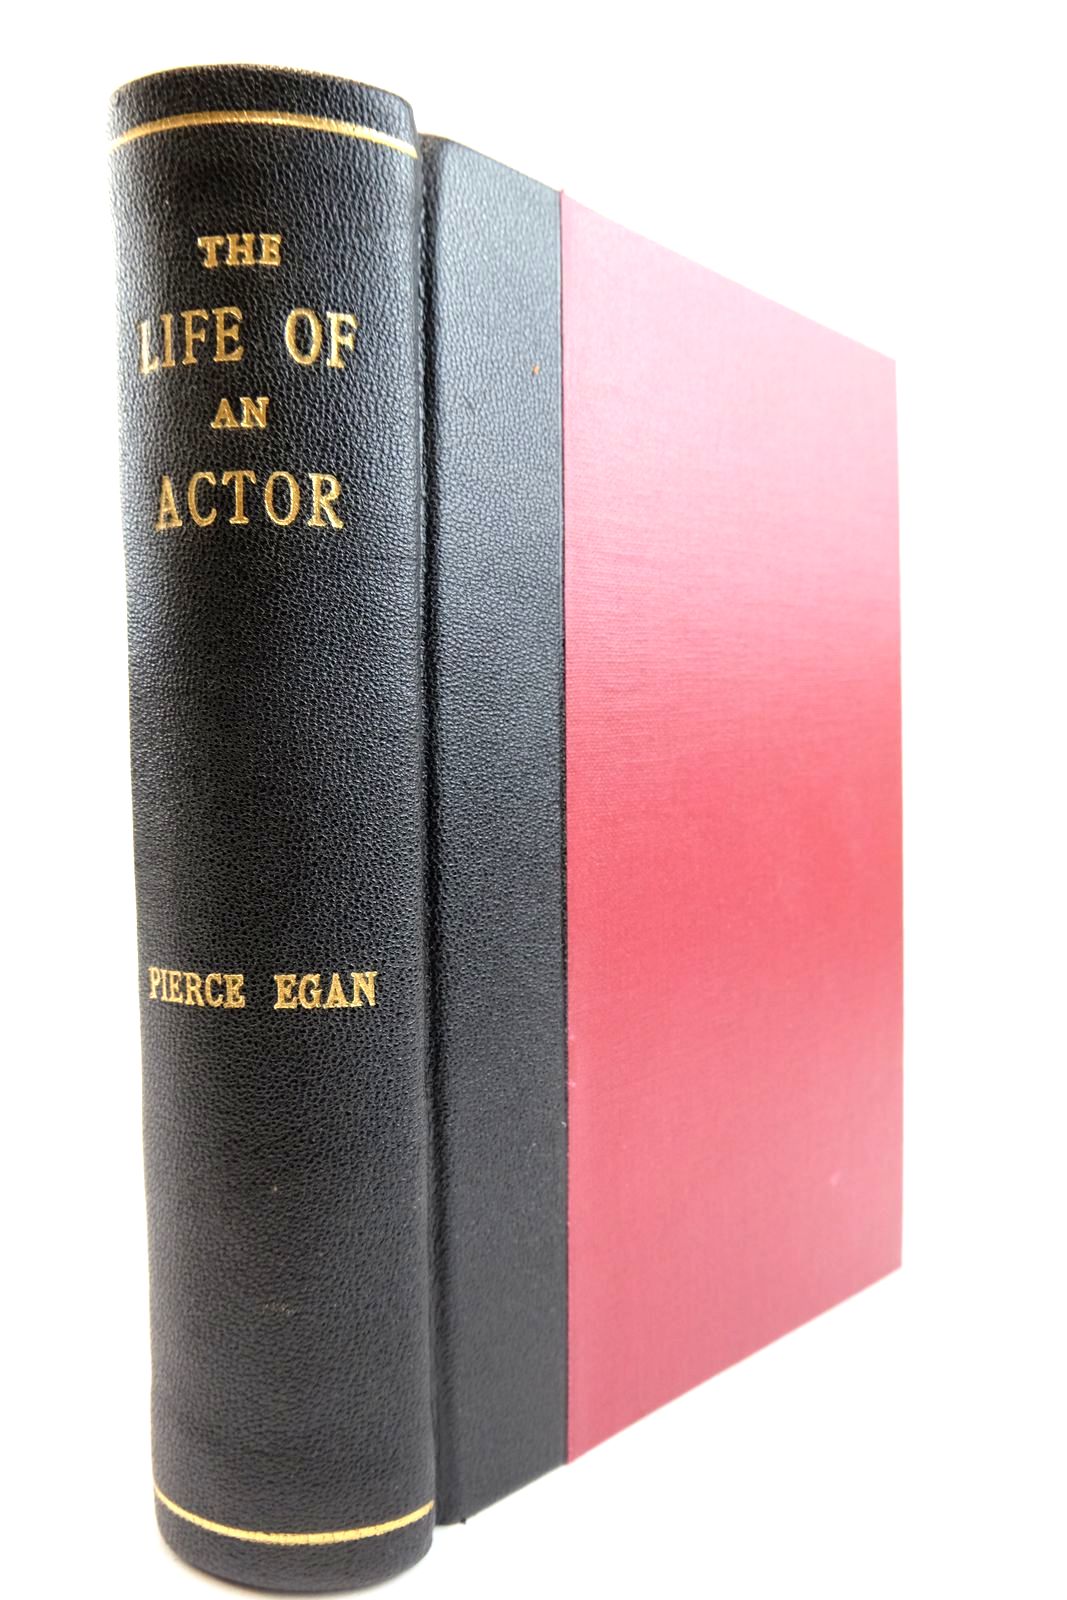 Photo of THE LIFE OF AN ACTOR written by Egan, Pierce Greenwood, T. illustrated by Lane, Theodore published by Pickering &amp; Chatto (STOCK CODE: 2134073)  for sale by Stella & Rose's Books